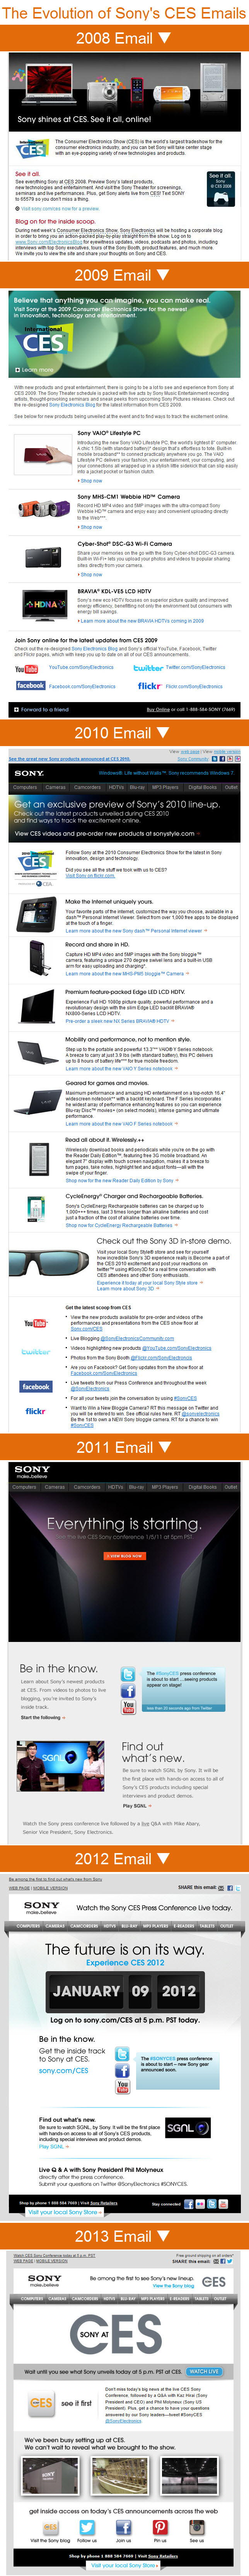 The Evolution of Sony's CES Emails